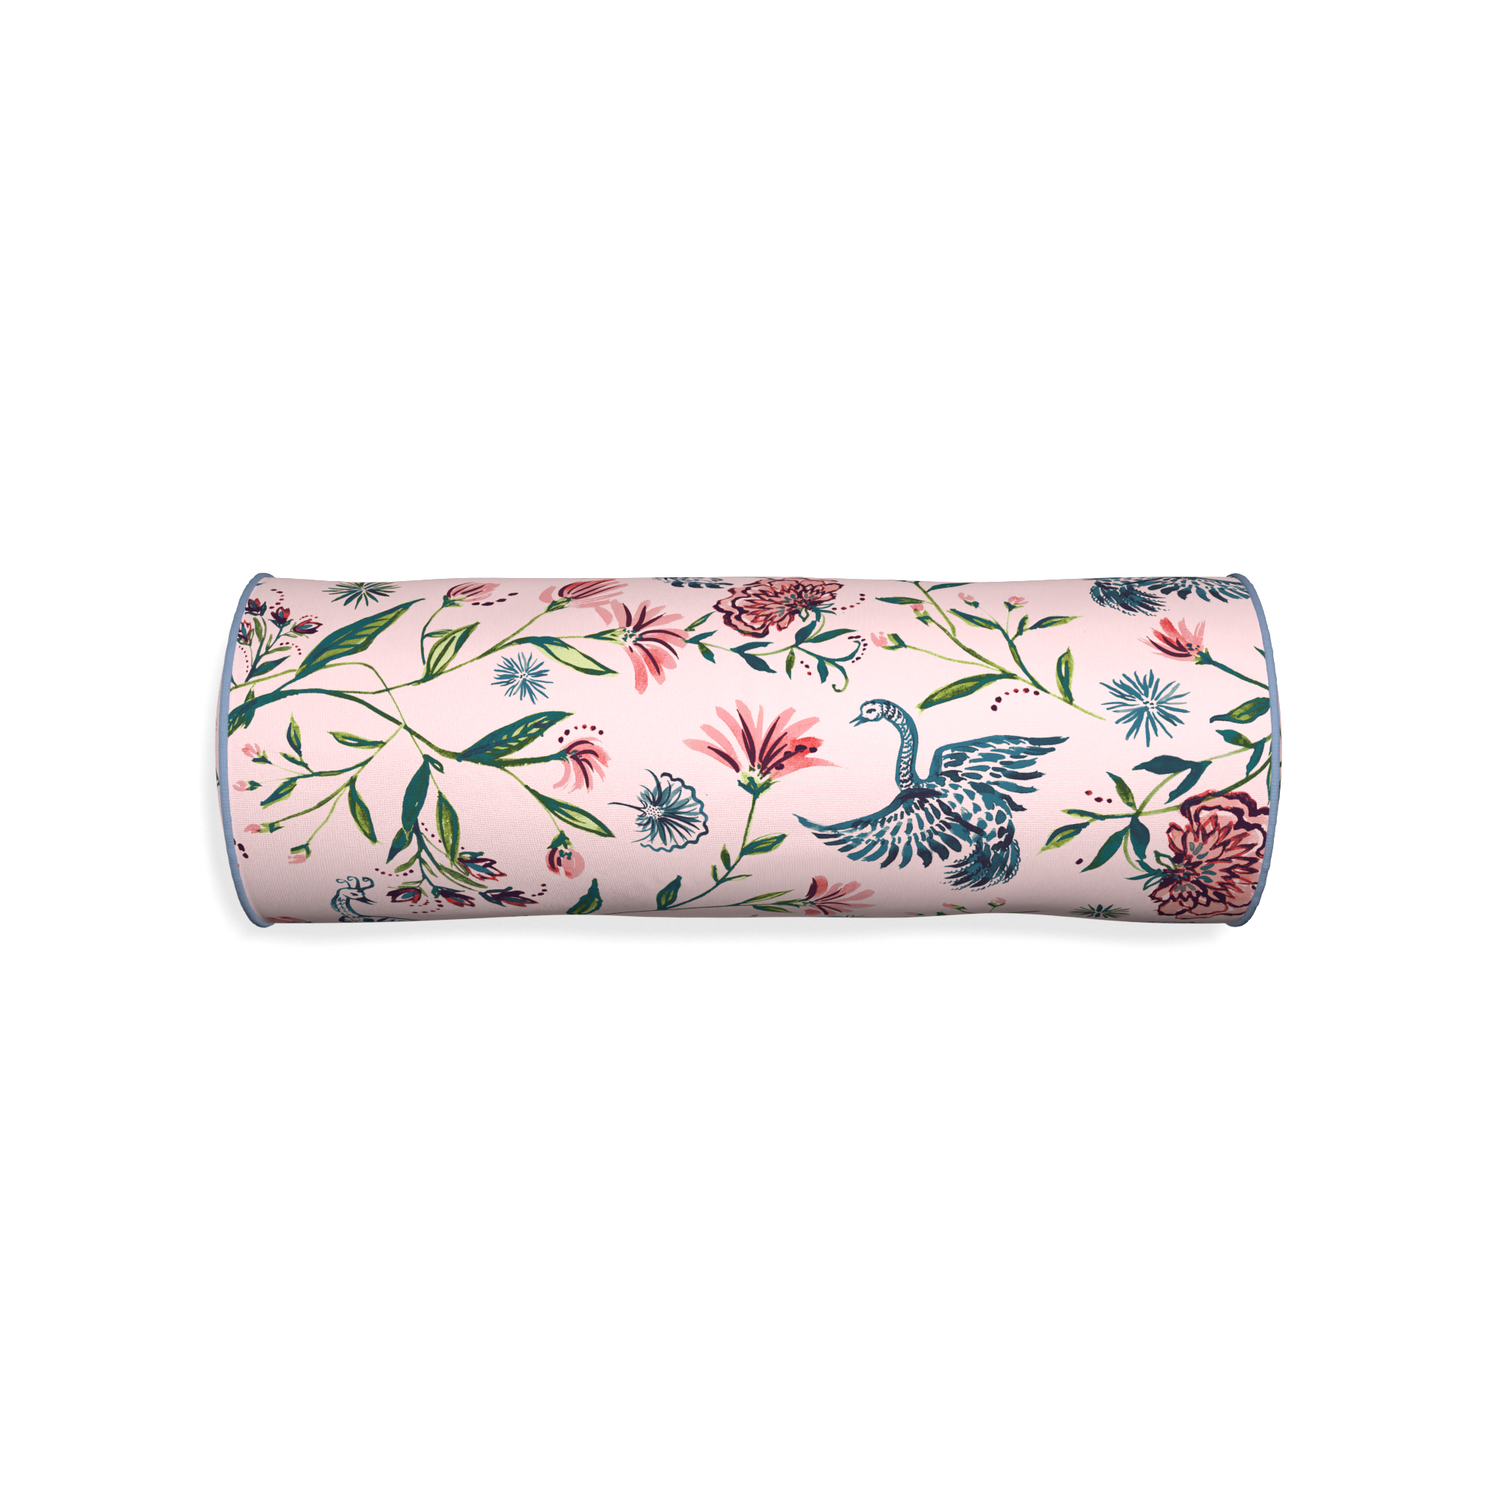 Bolster daphne rose custom rose chinoiseriepillow with sky piping on white background